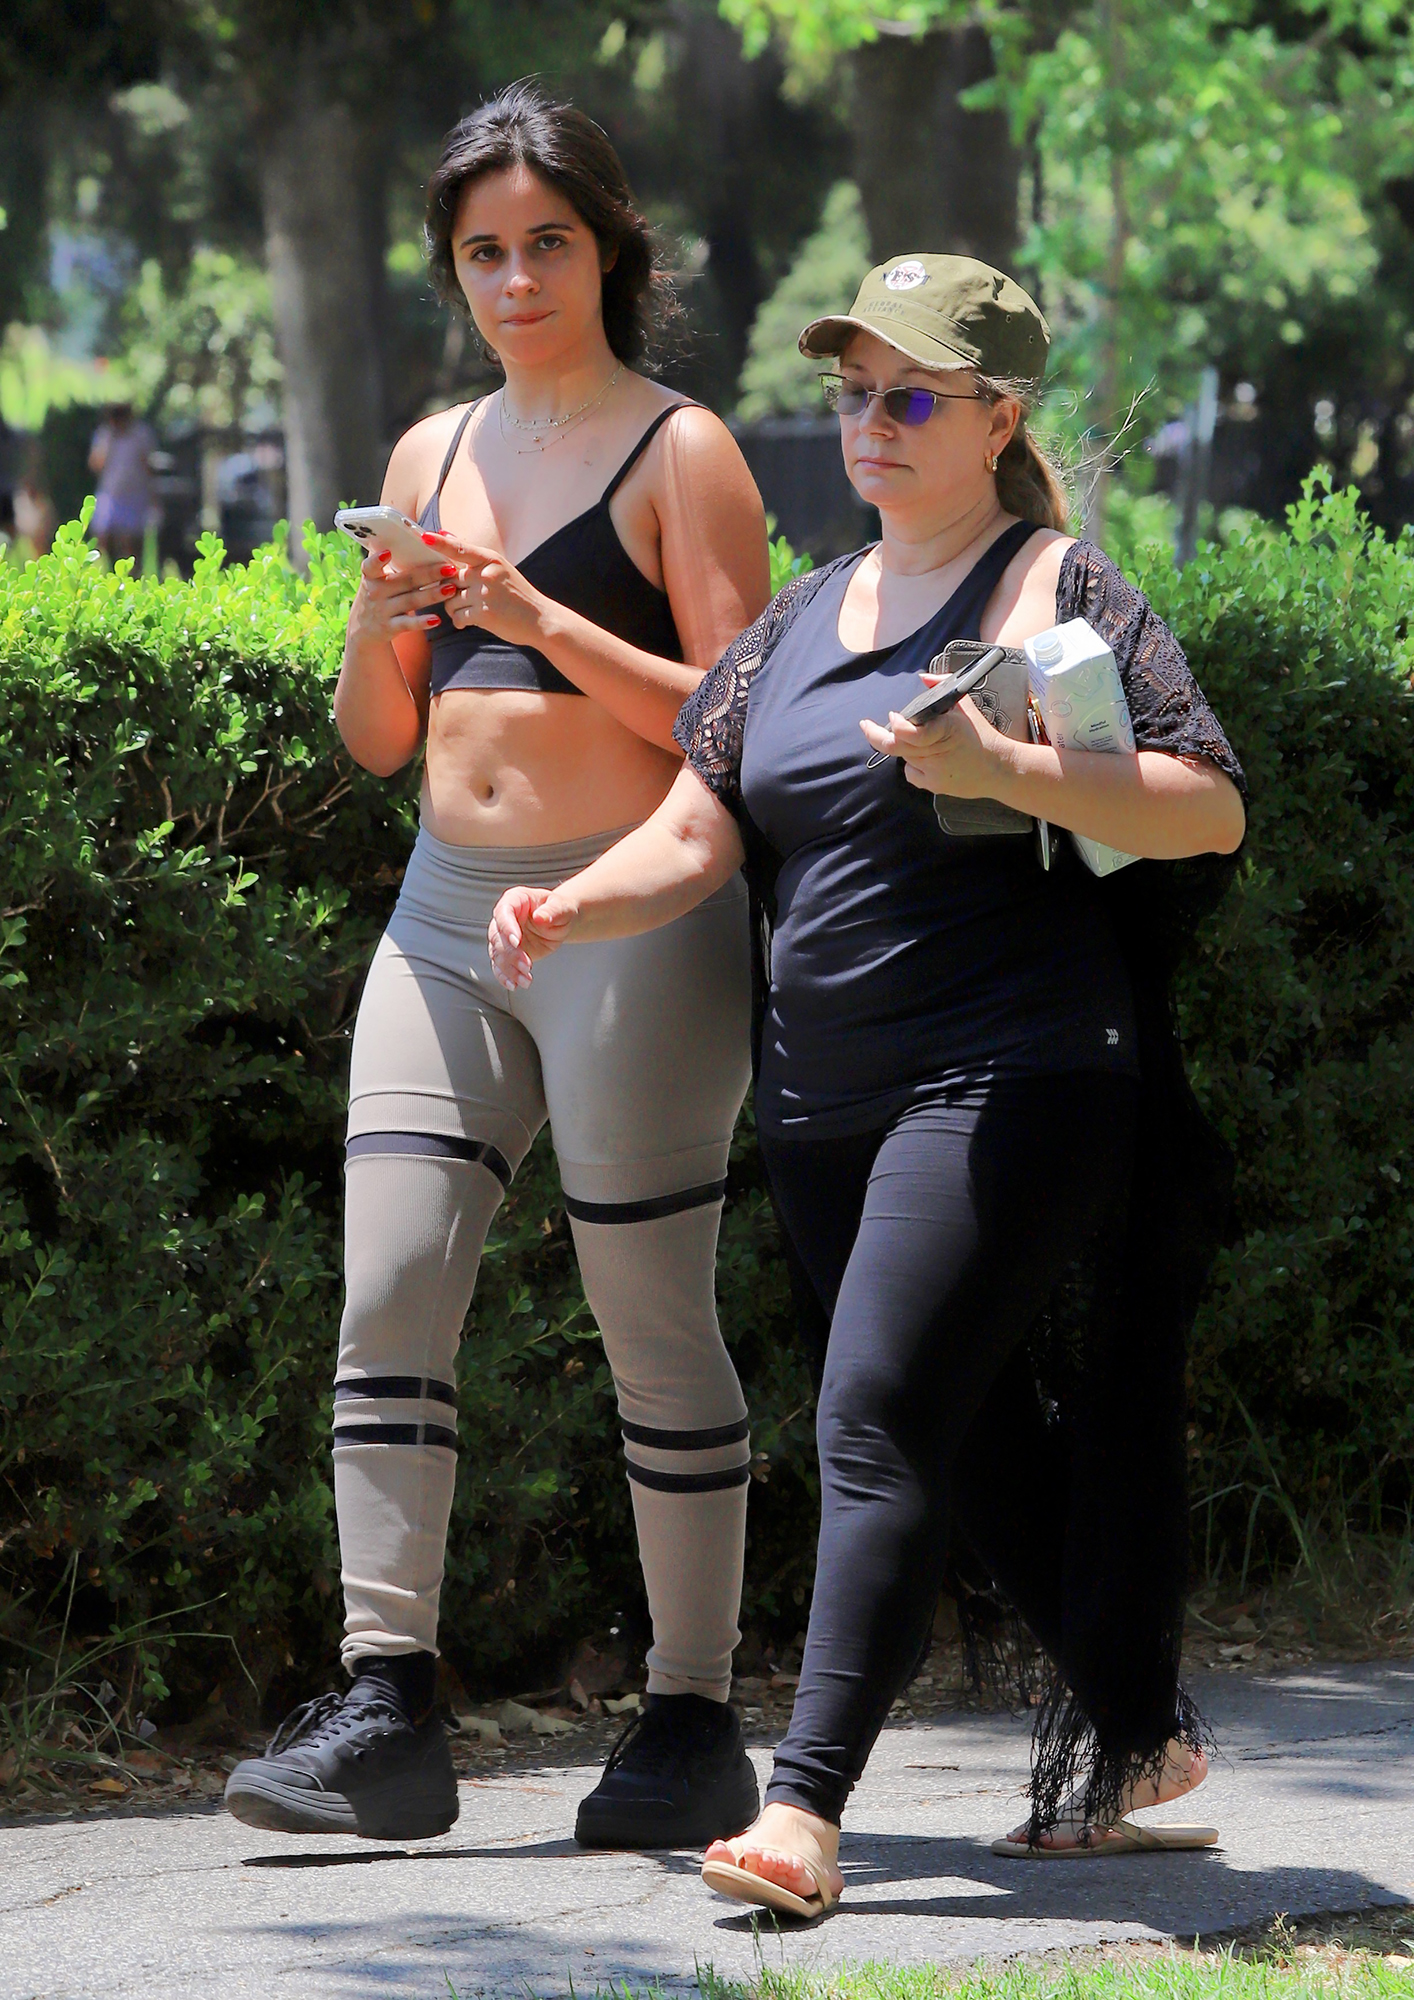 https://www.lifeandstylemag.com/wp-content/uploads/2021/07/Camila-Cabello-Flaunts-Curves-in-Leggings-and-a-Sports-Bra-During-a-Walk-With-Her-Mom-05.jpg?fit=800%2C1132&quality=86&strip=all